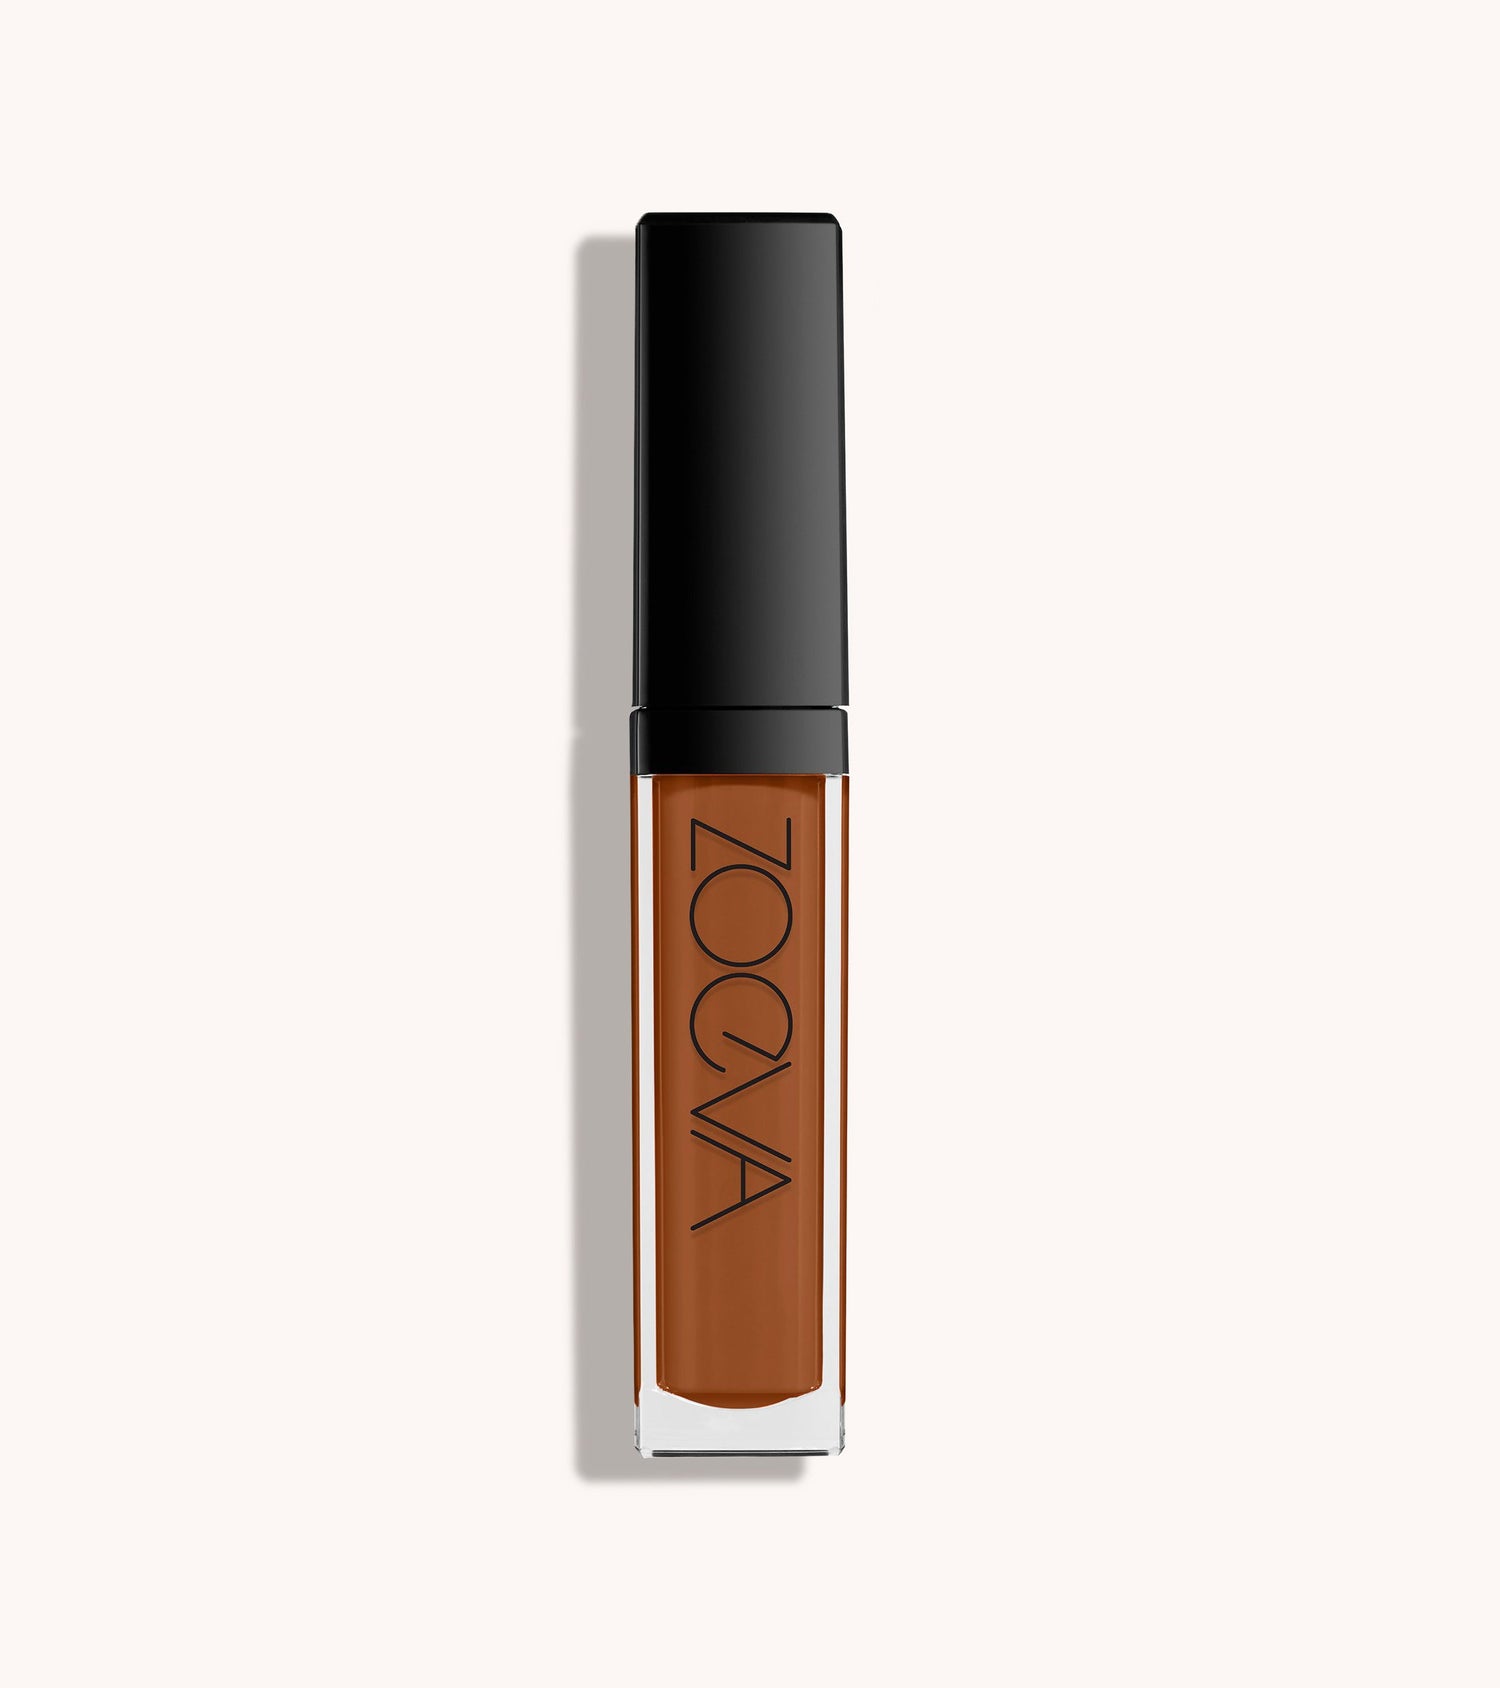 Authentik Skin Perfector Concealer (290 Undoubted) Main Image featured